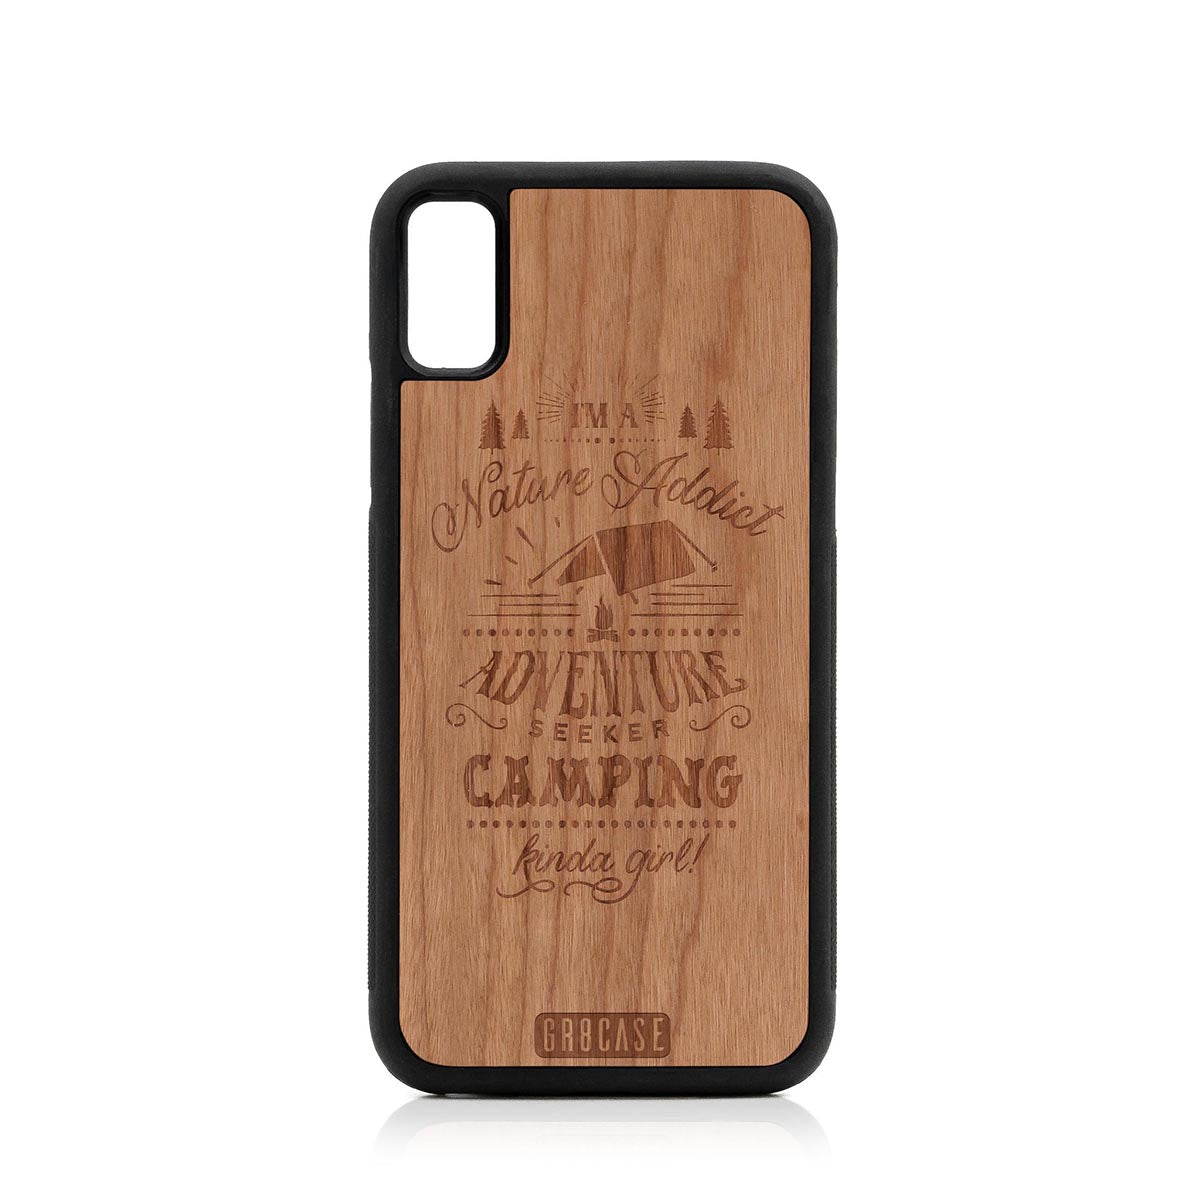 I'm A Nature Addict Adventure Seeker Camping Kinda Girl Design Wood Case For iPhone X/XS by GR8CASE